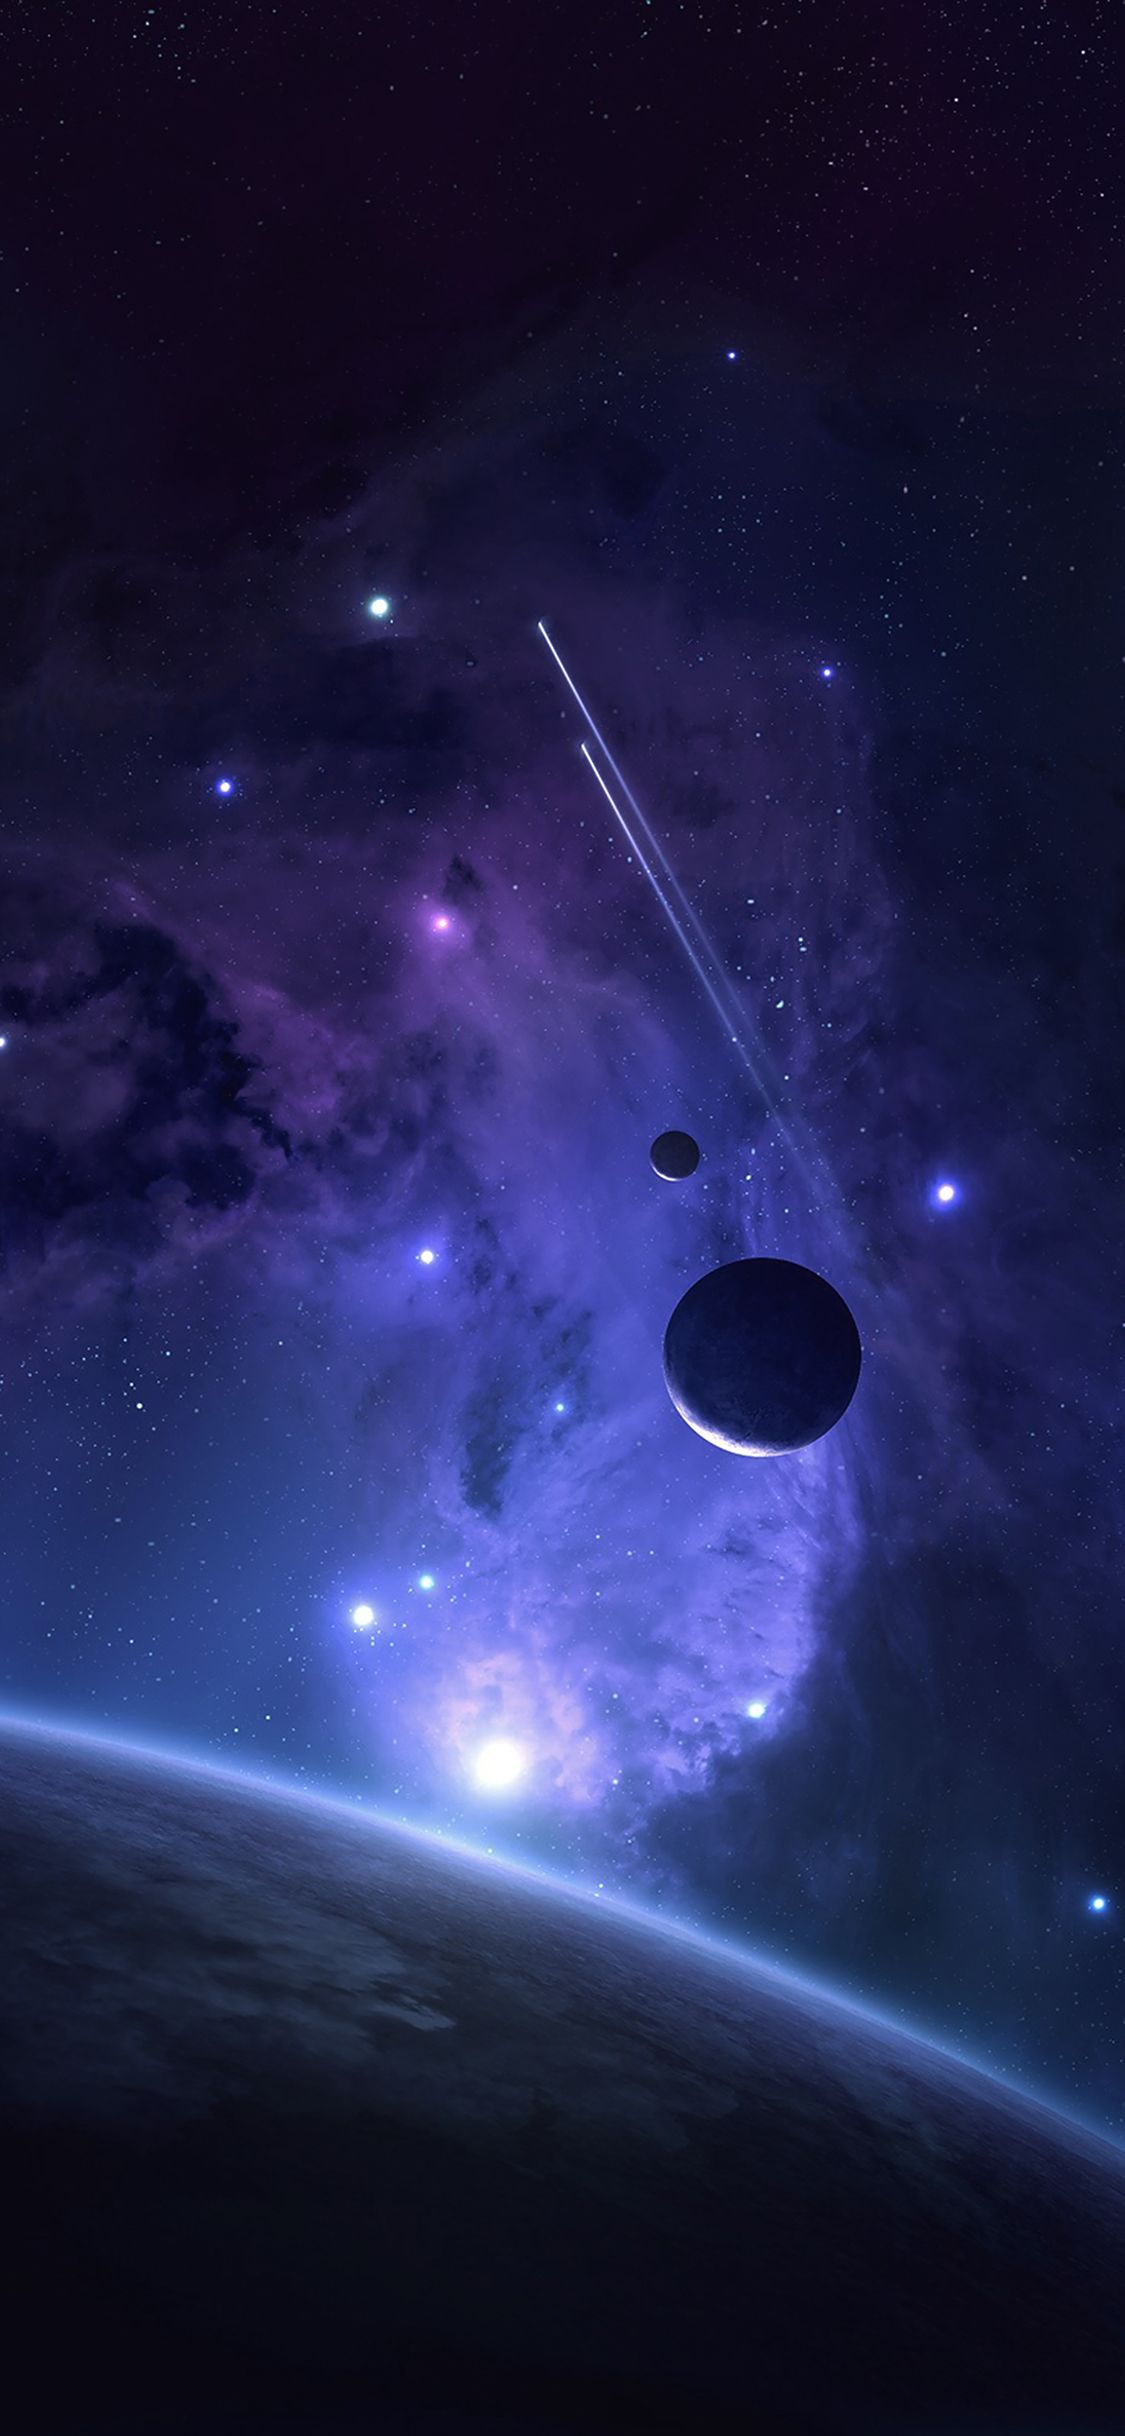 iPhoneX wallpaper: planets space abstract blue art